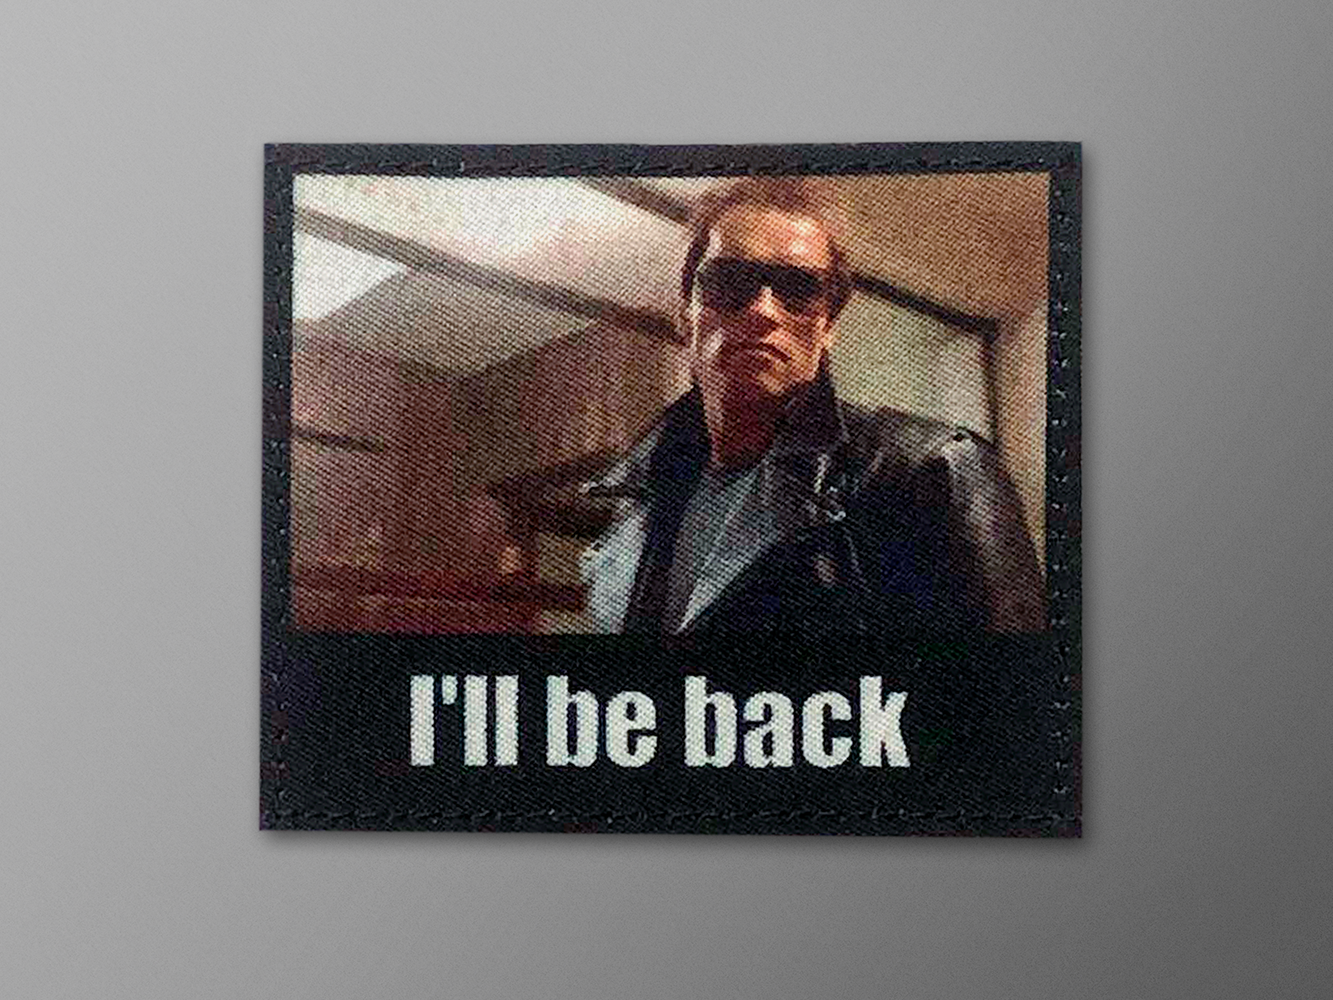 I'll be back – der Kino Patch